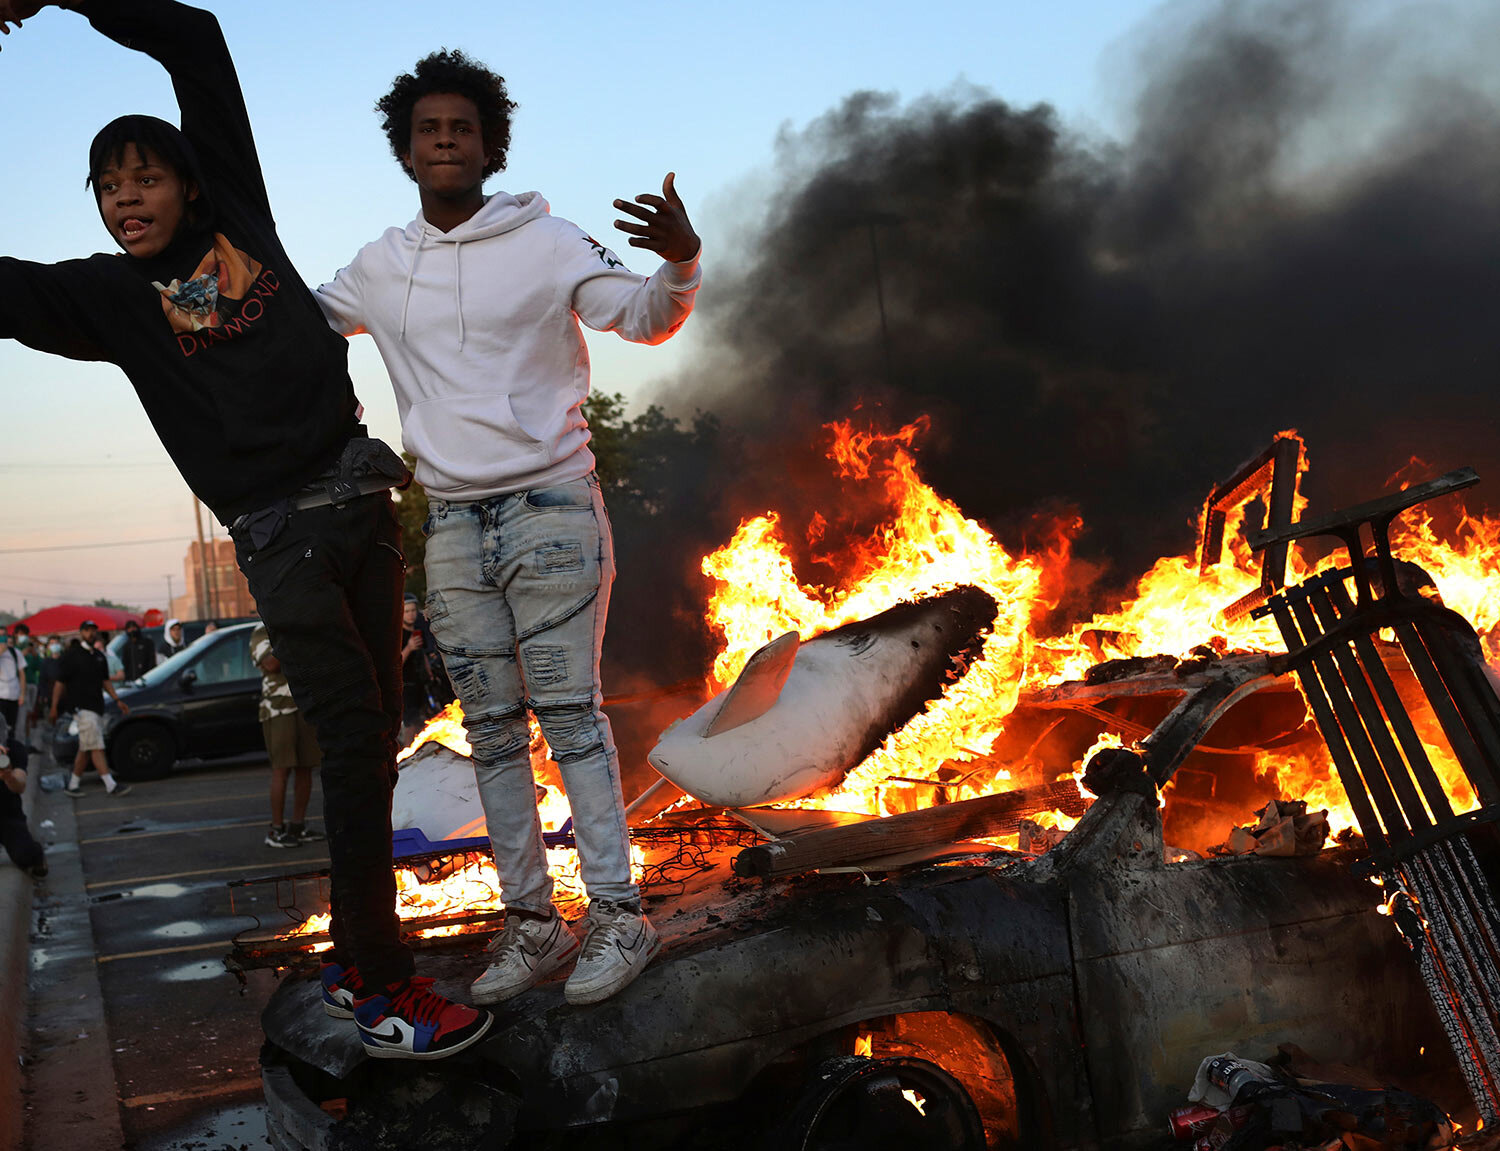  Young men stand atop a burning car in the Target parking lot E. Lake St. during a third night of unrest following the death of George Floyd while in Minneapolis police custody early in the week and seen Thursday, May 28, 2020, in Minneapolis, MN. (E